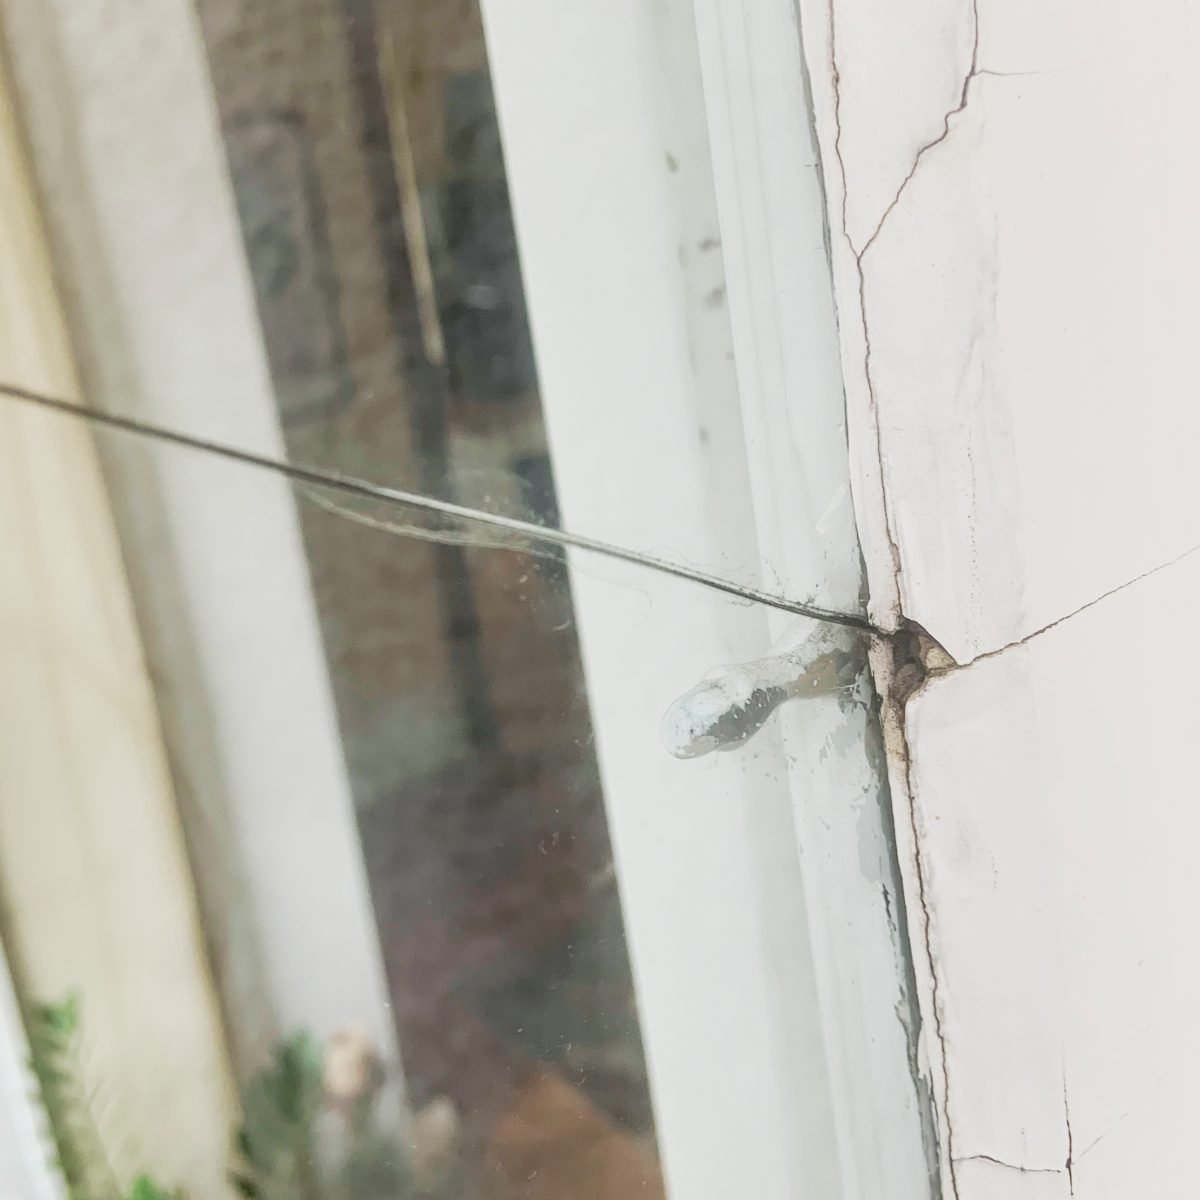 How to Fix a Cracked Window